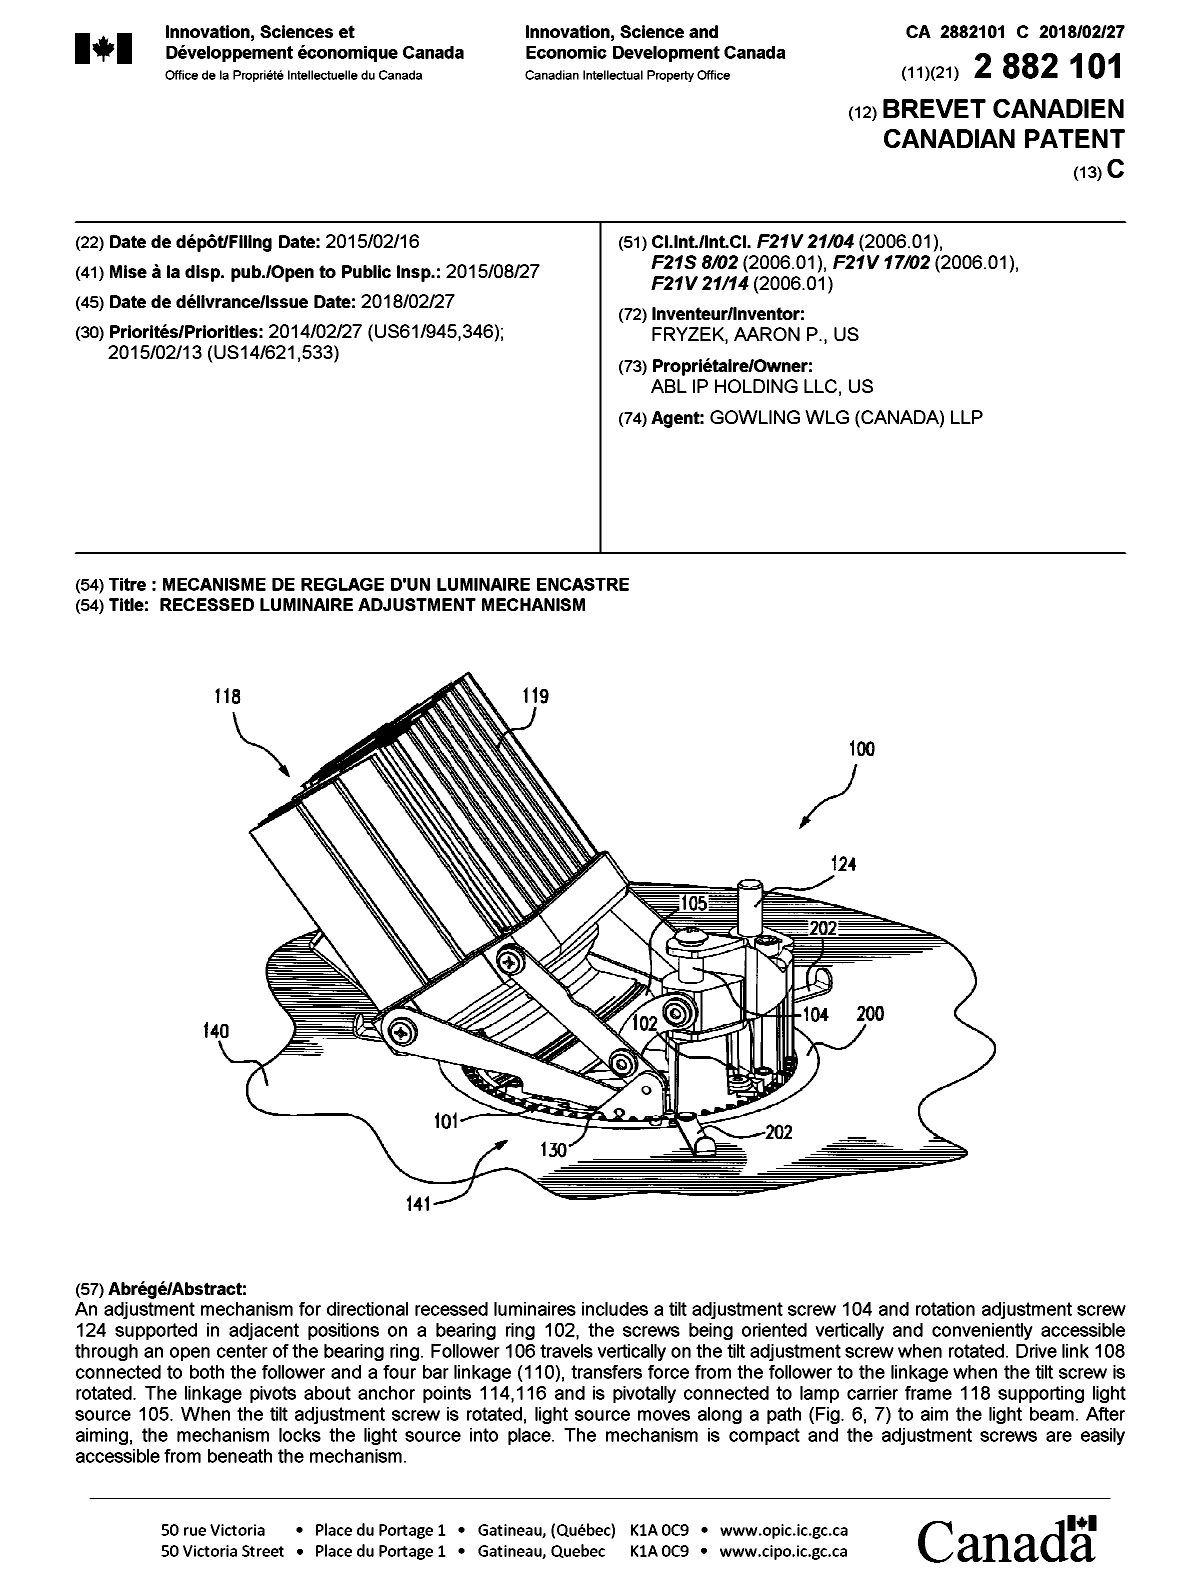 Canadian Patent Document 2882101. Cover Page 20180202. Image 1 of 1